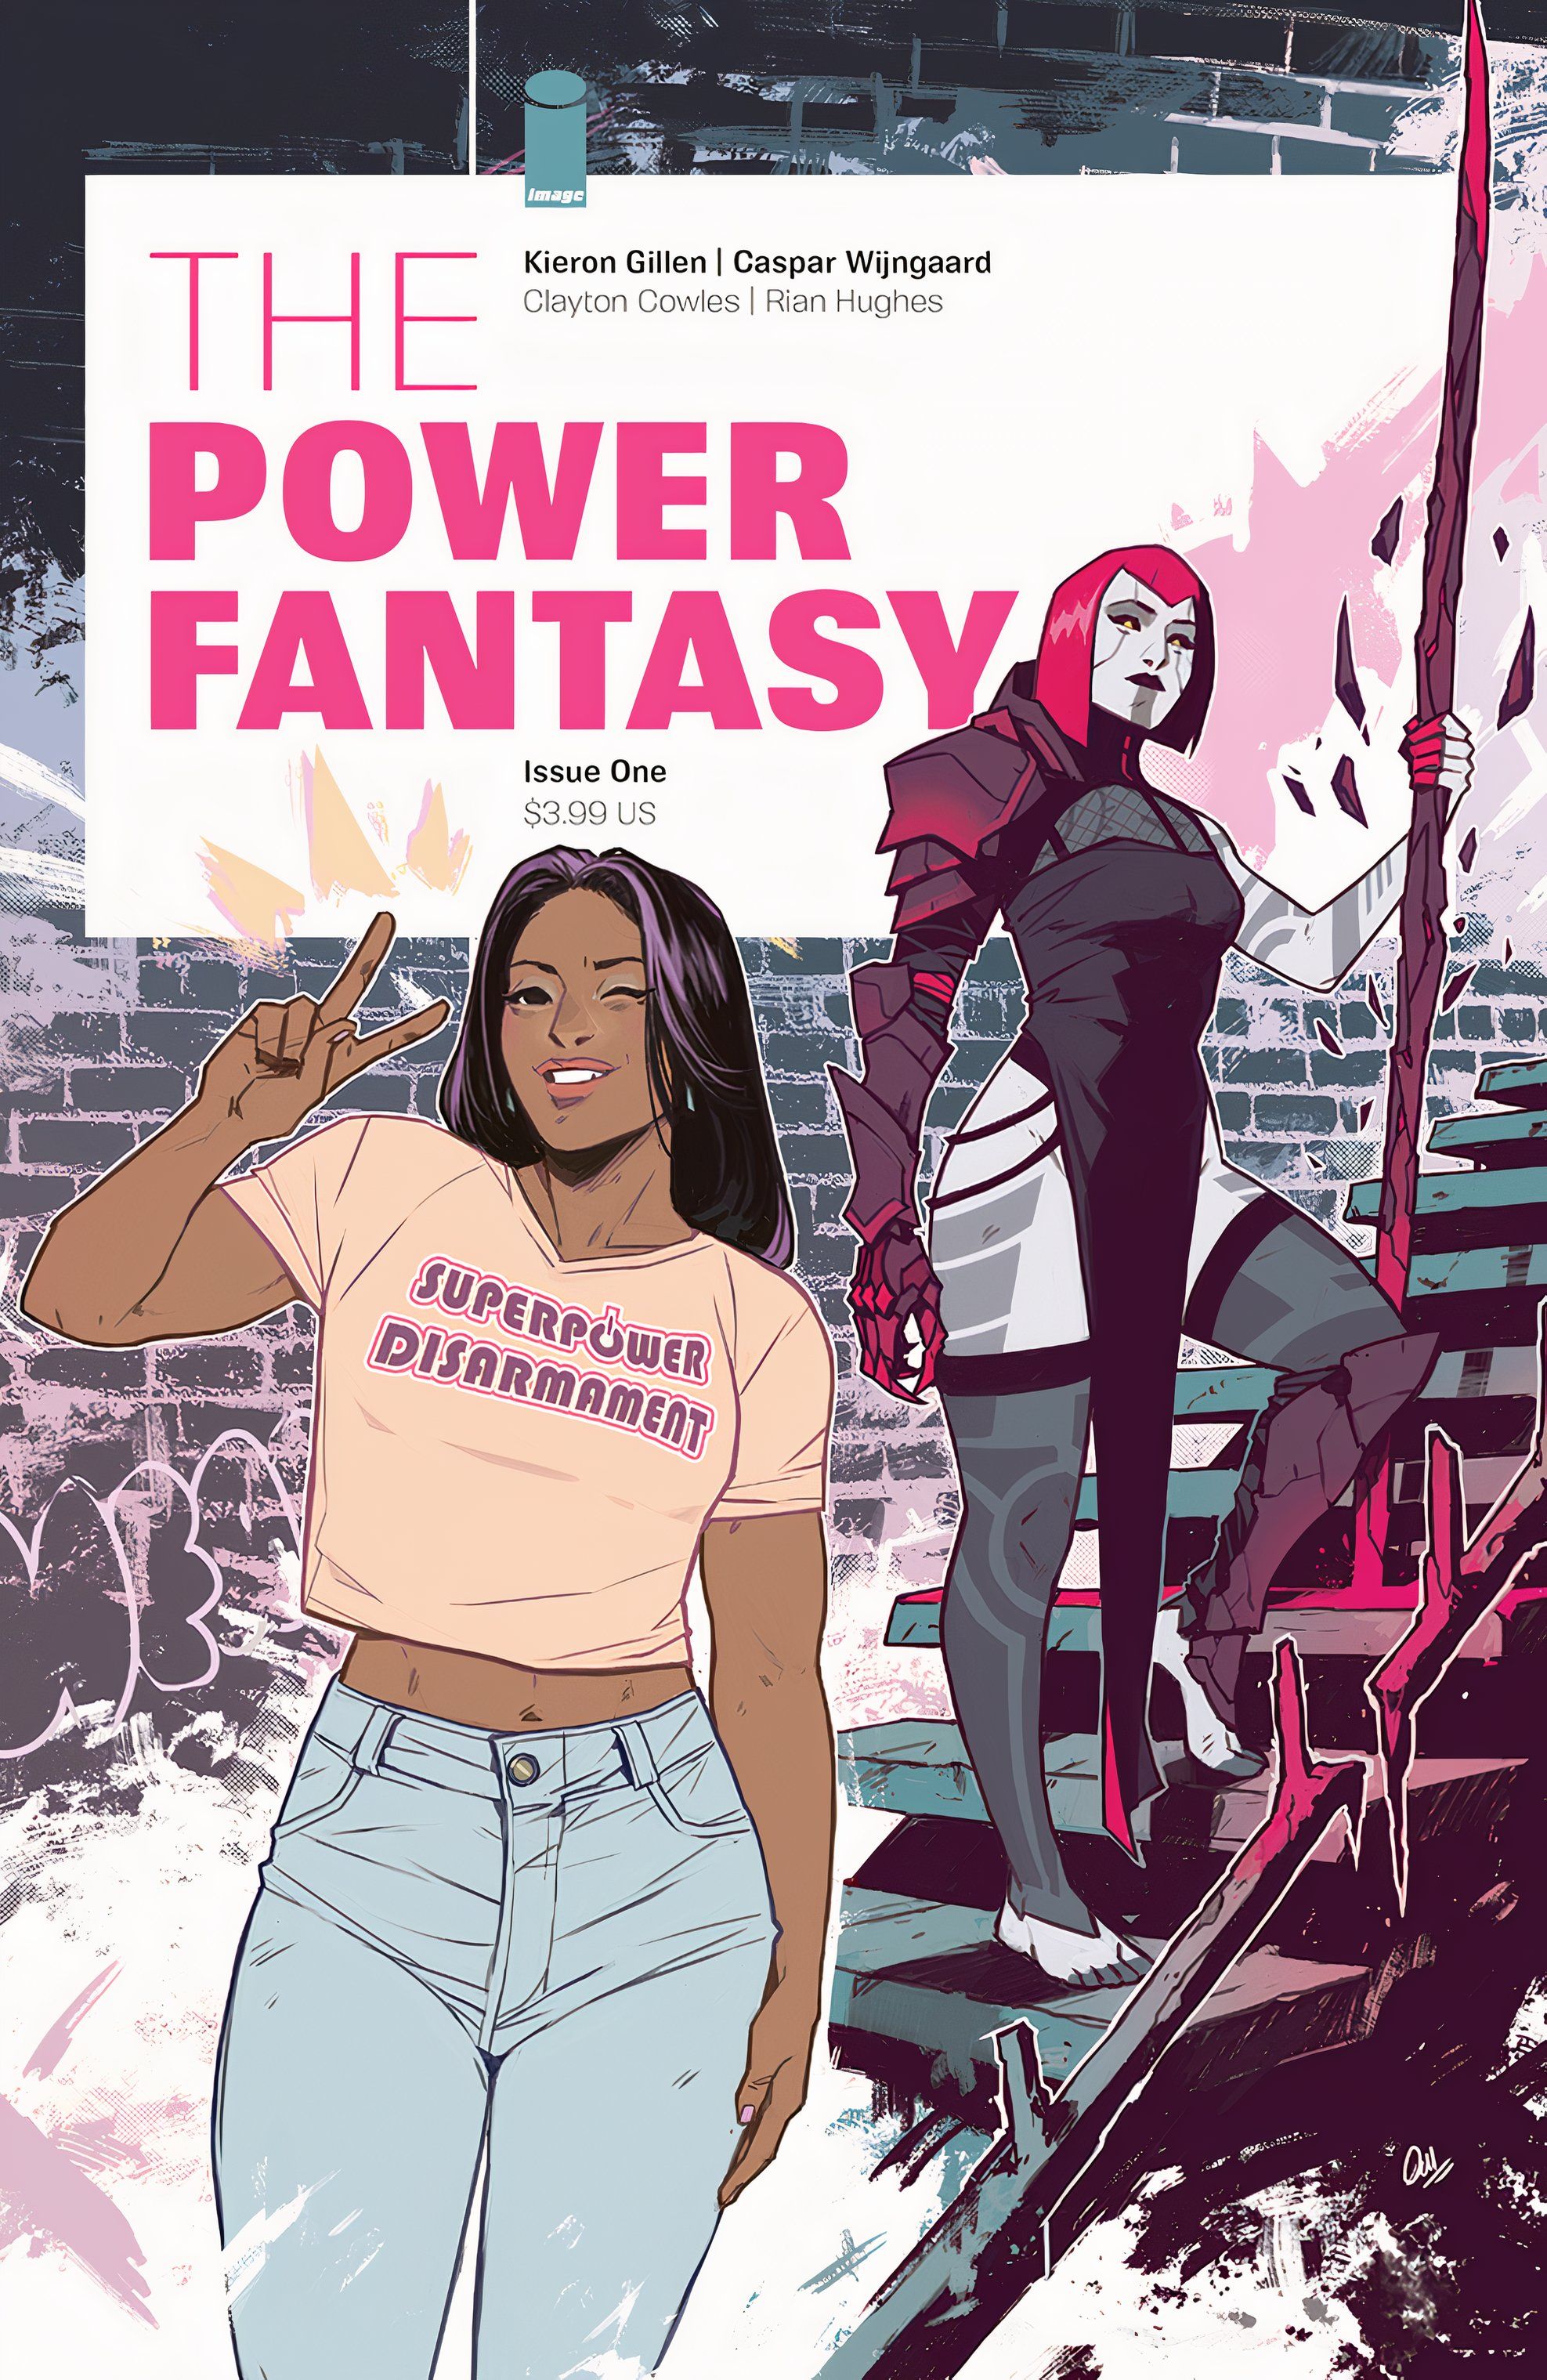 The Power Fantasy #1 cover, featuring two superpowered characters